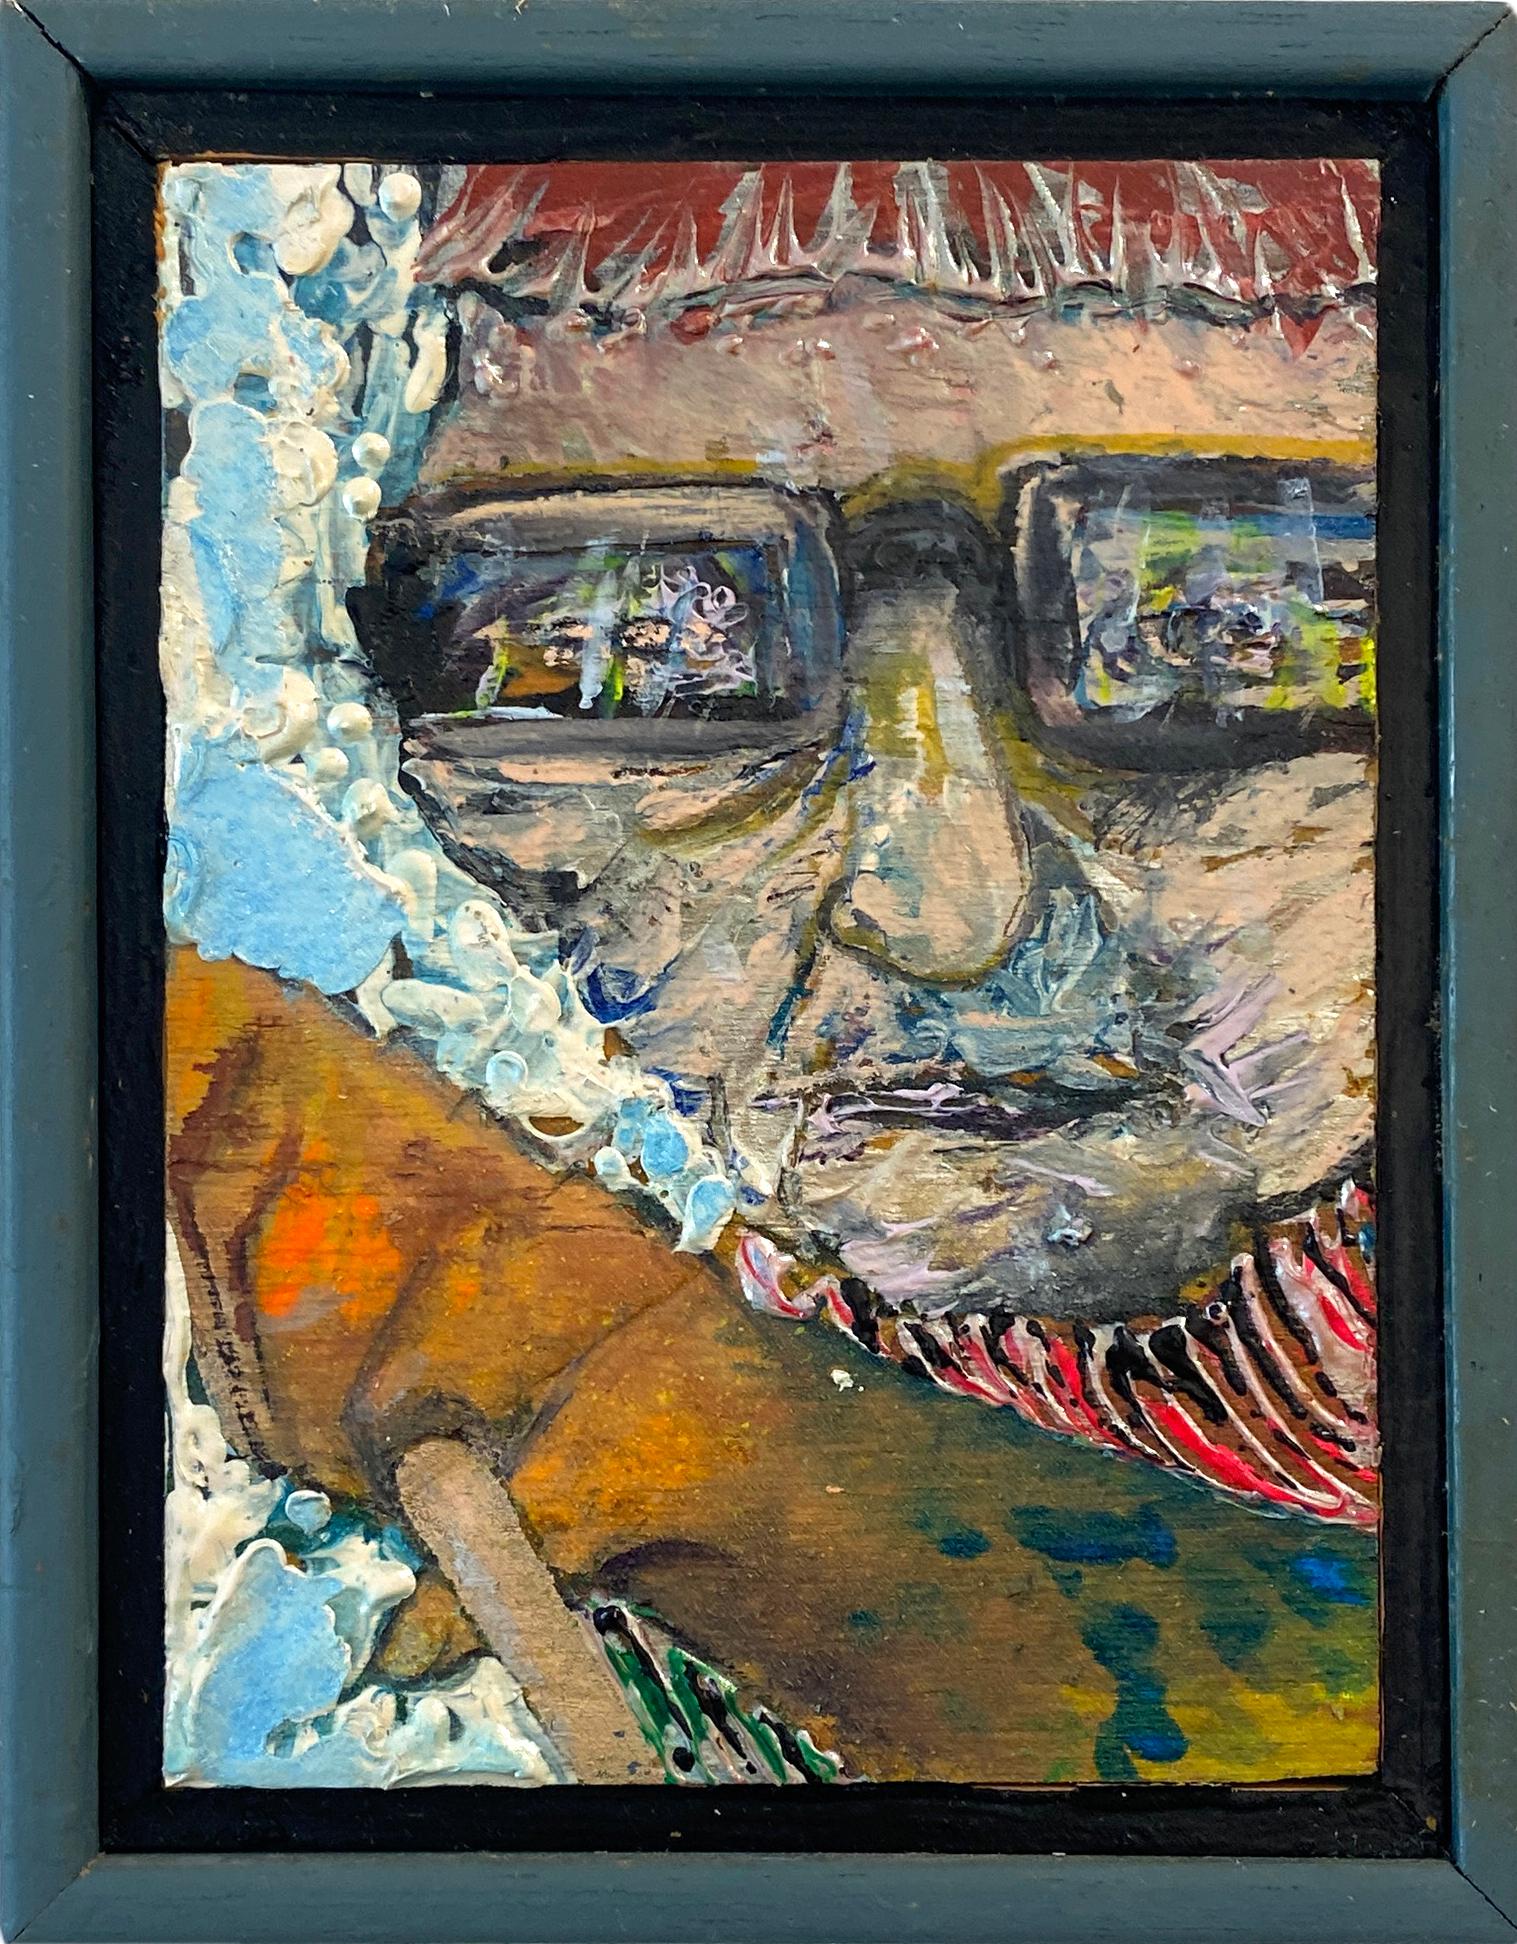 Available at Madelyn Jordon Fine Art. 'Marblemanblossom' by Stanley Boxer, 1991. Oil and mixed media on canvas, 6.25 x 4.75 in. / Frame: 7 x 5.5 x 2 in.  This painting features the face of a man wearing glasses with his arm extended out. This work